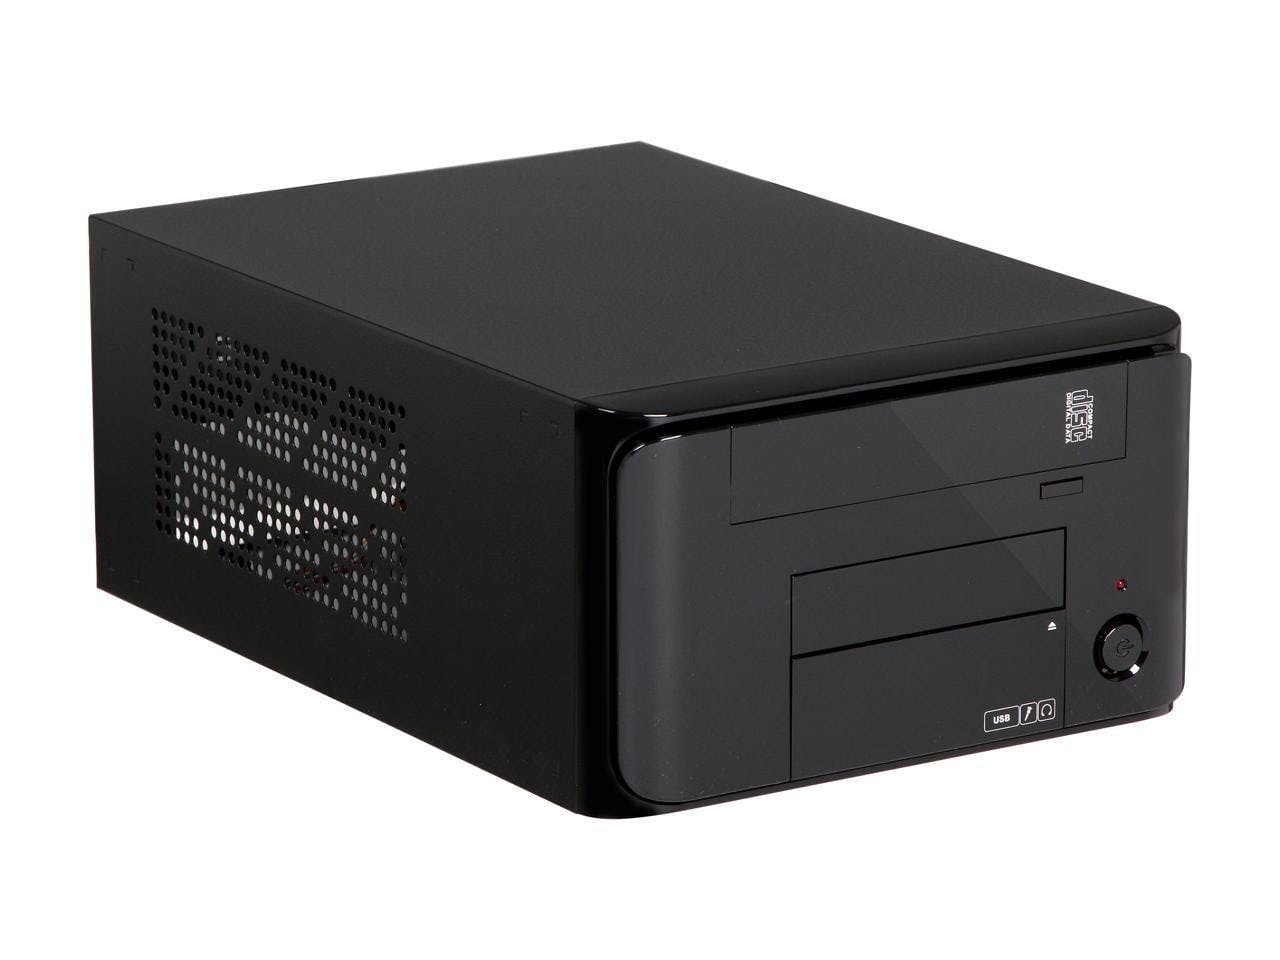 Compact Black Mini-ITX Tower Case with 250W Power Supply